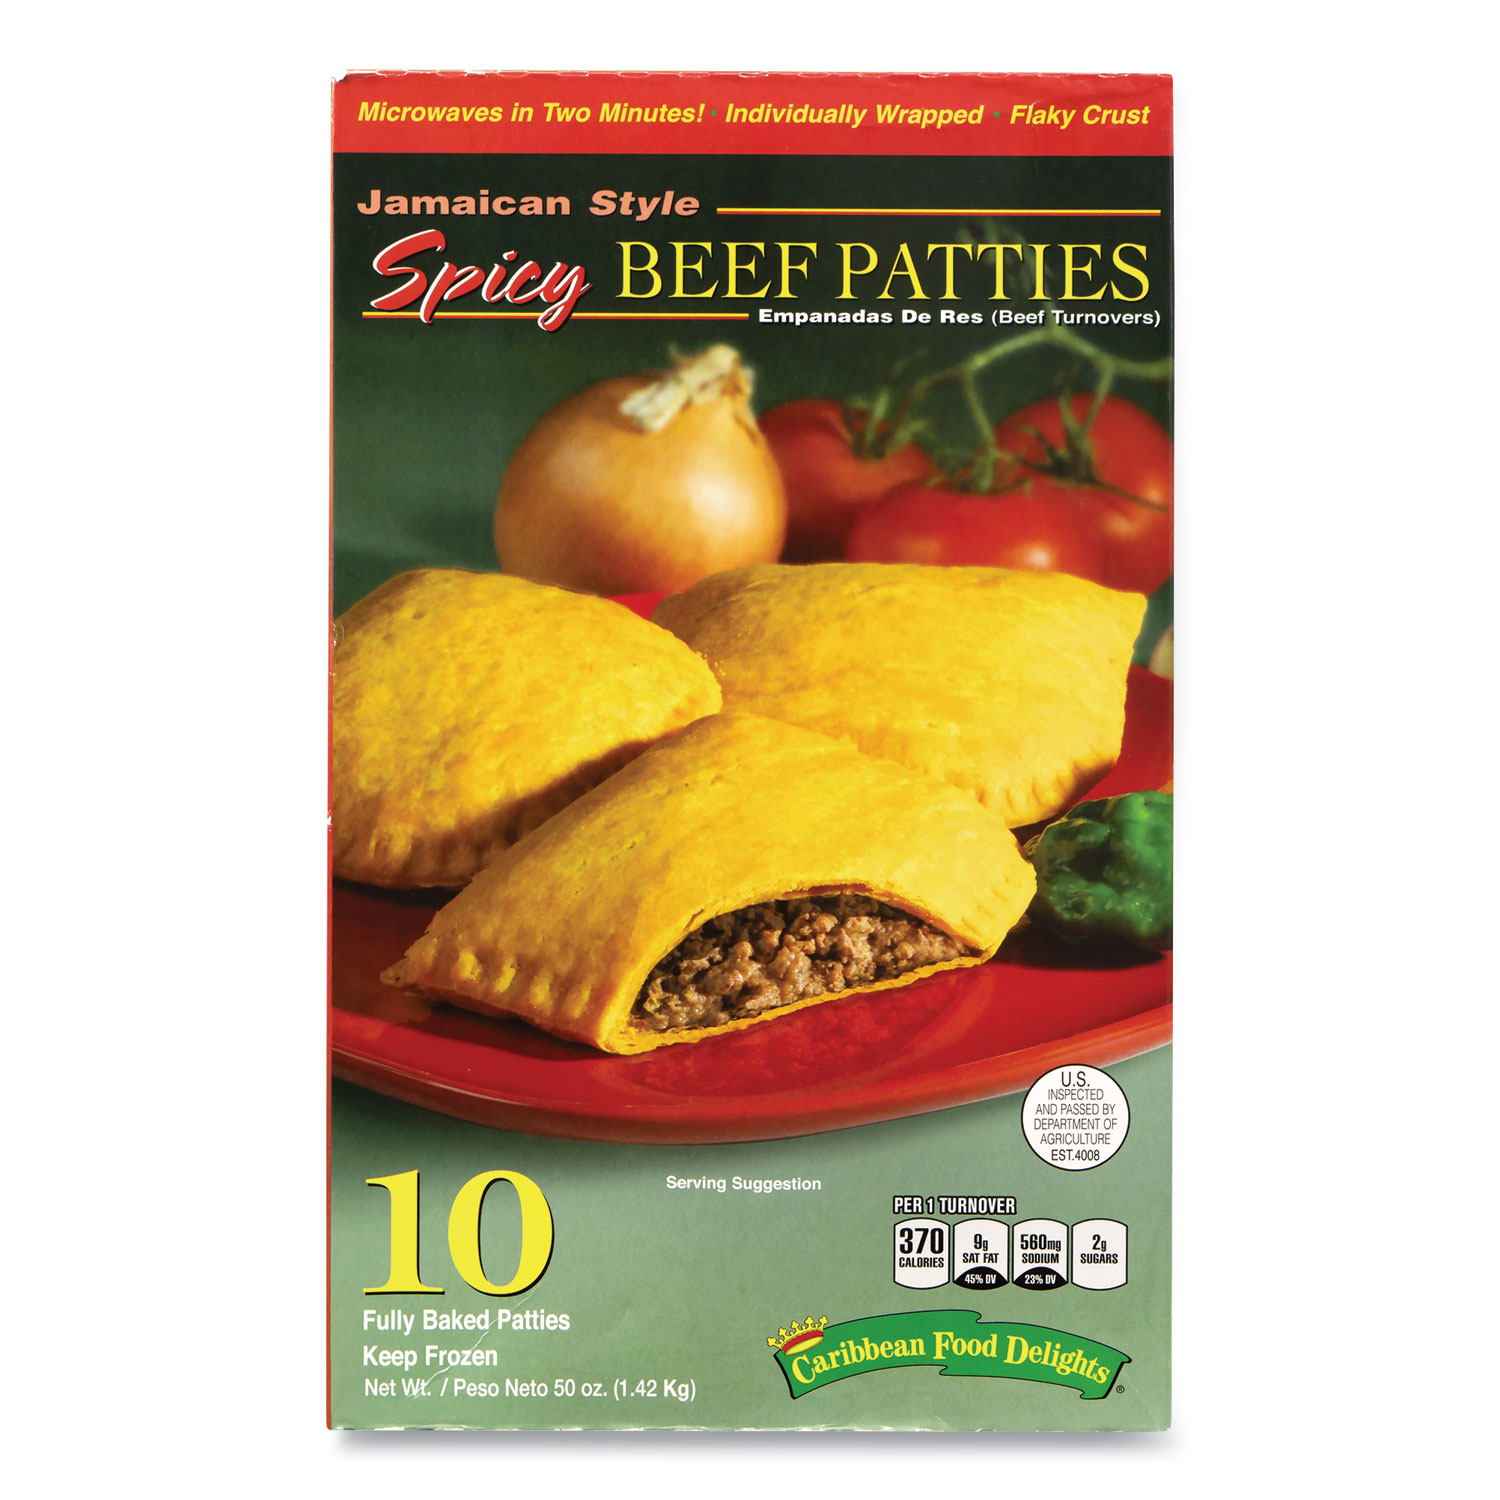 Caribbean Food Delights® Jamacian Style Spicy Beef Empanadas, 50 oz Box, 10/Box, Free Delivery in 1-4 Business Days